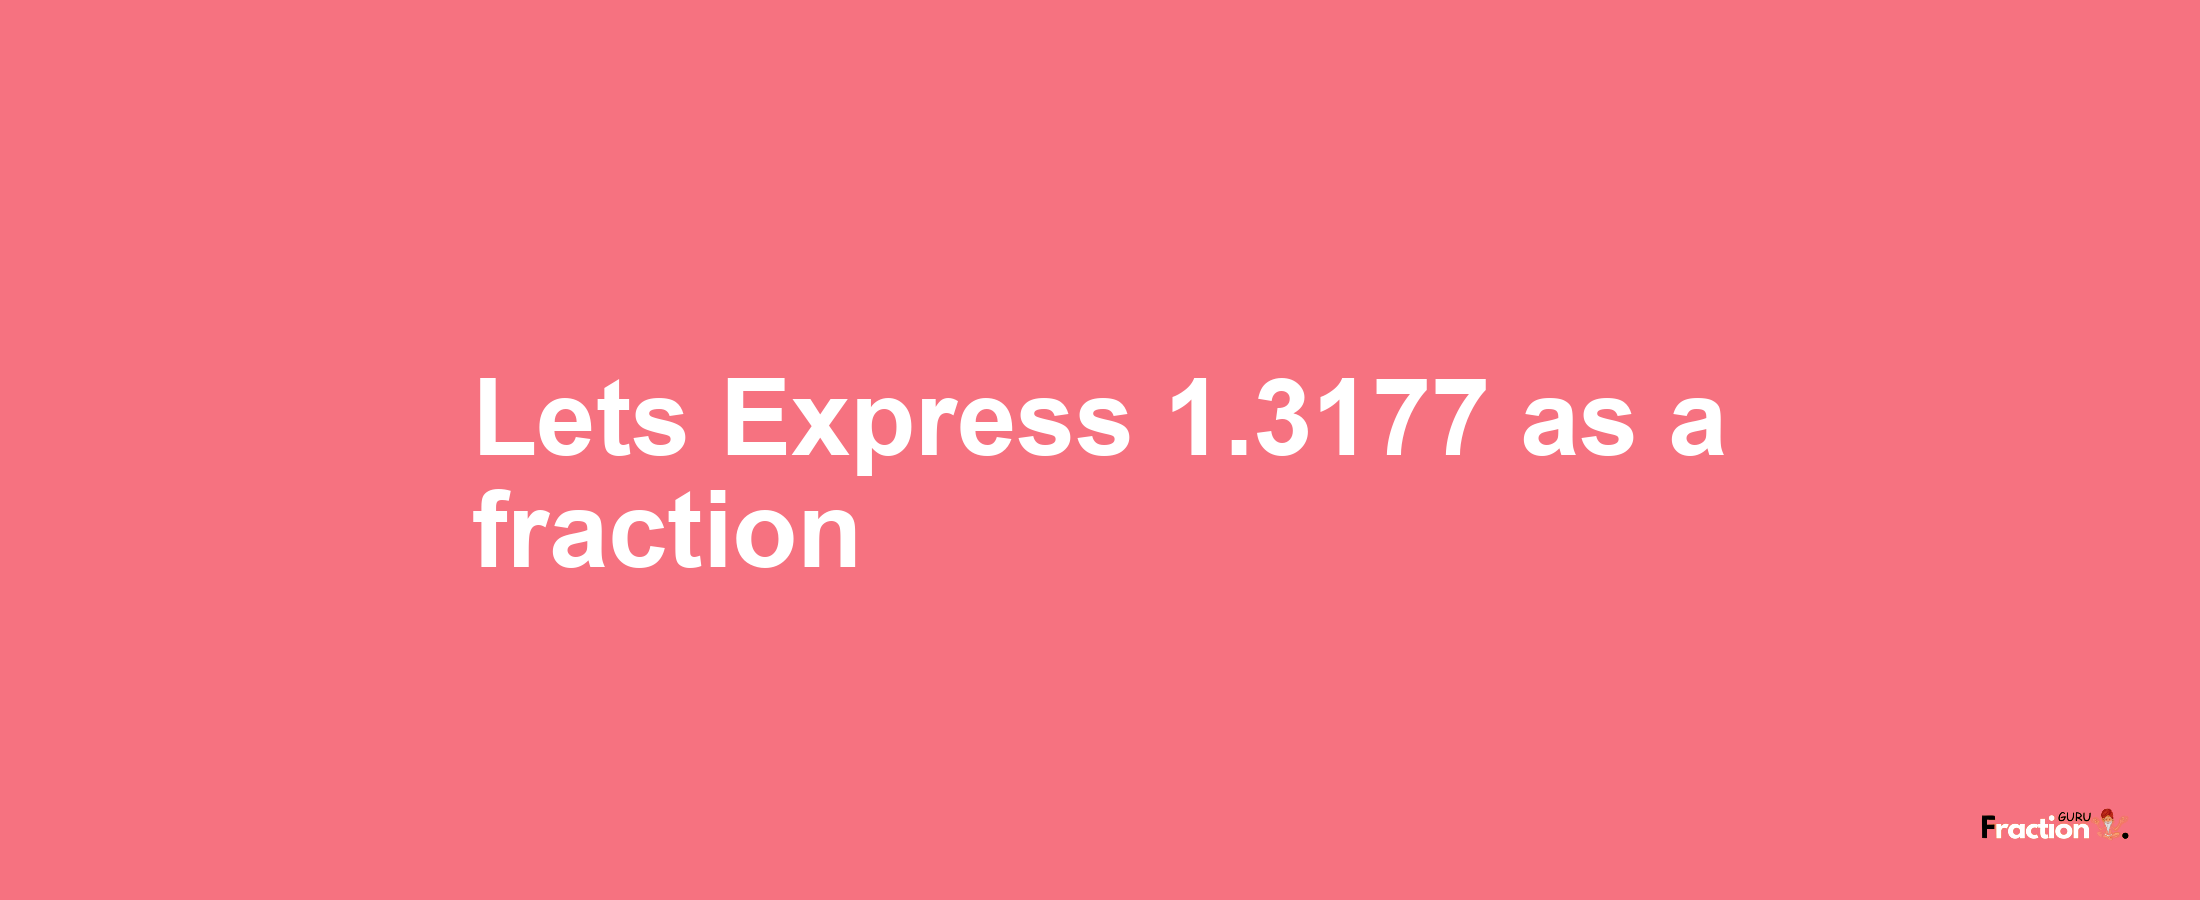 Lets Express 1.3177 as afraction